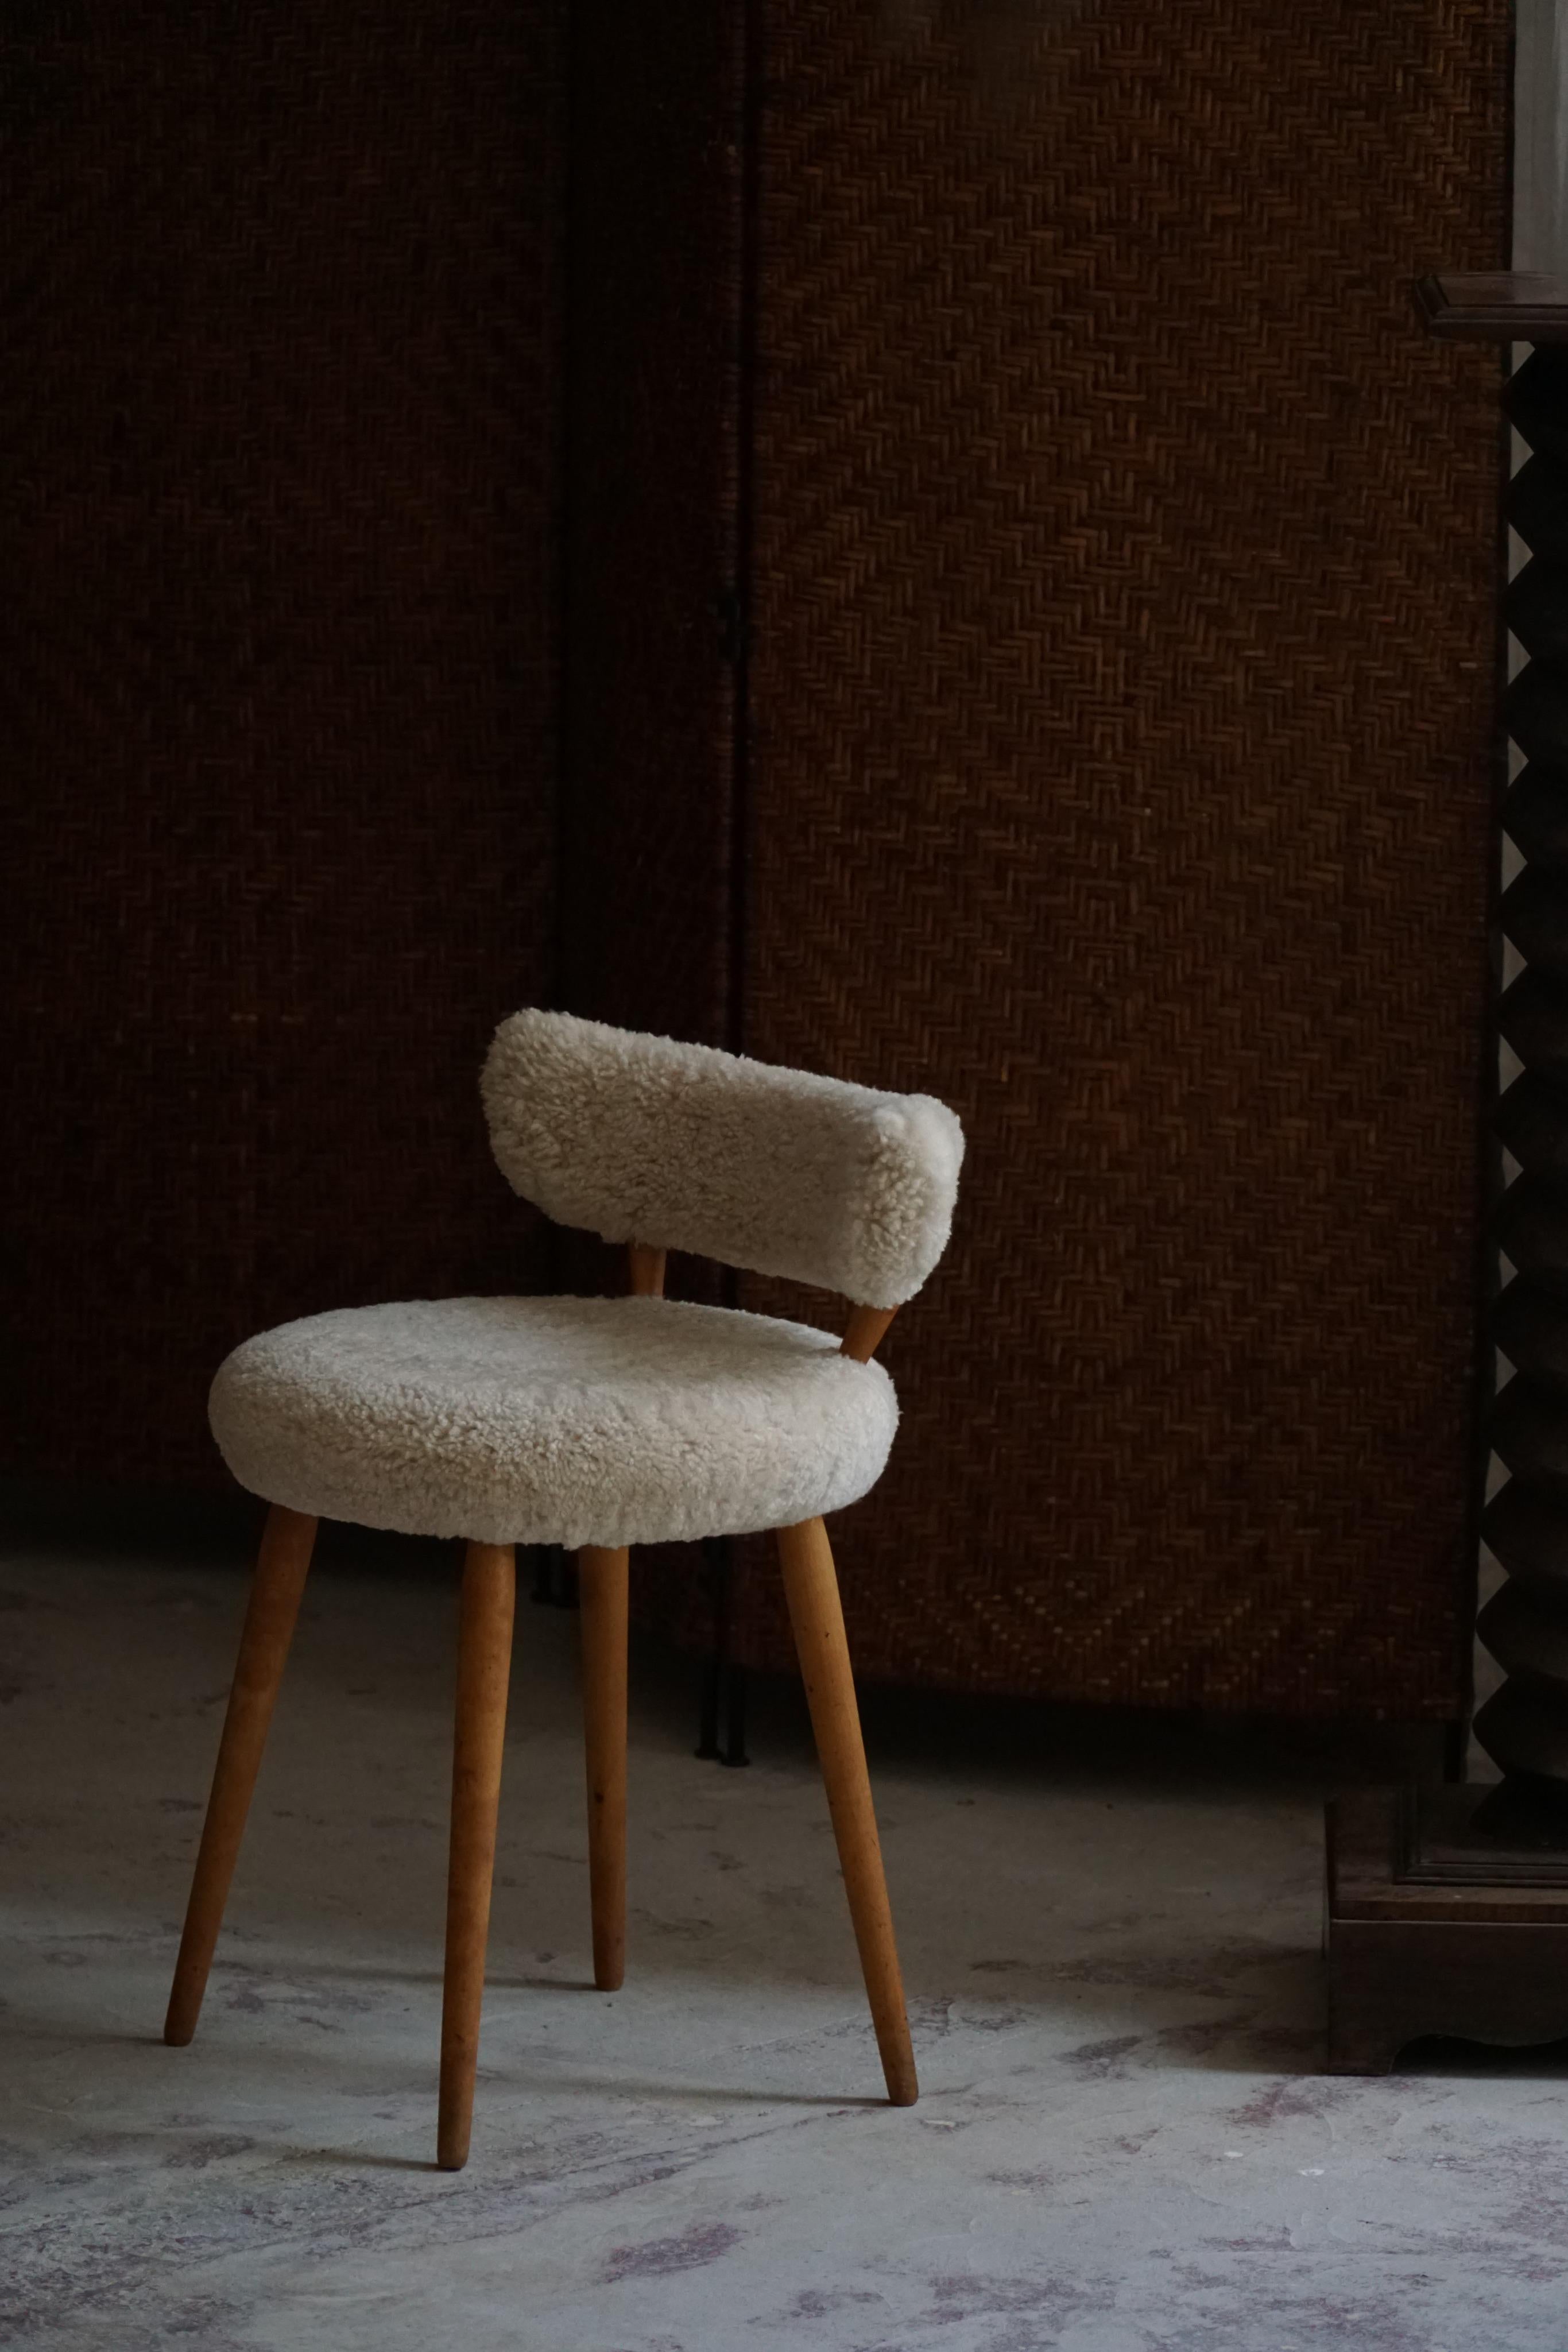 Presenting an exquisite low back makeup chair crafted in the 1940s by a gifted Danish cabinetmaker. This chair is a harmonious combination of sophistication, functionality, and timeless aesthetics, meticulously restored and reupholstered in the soft